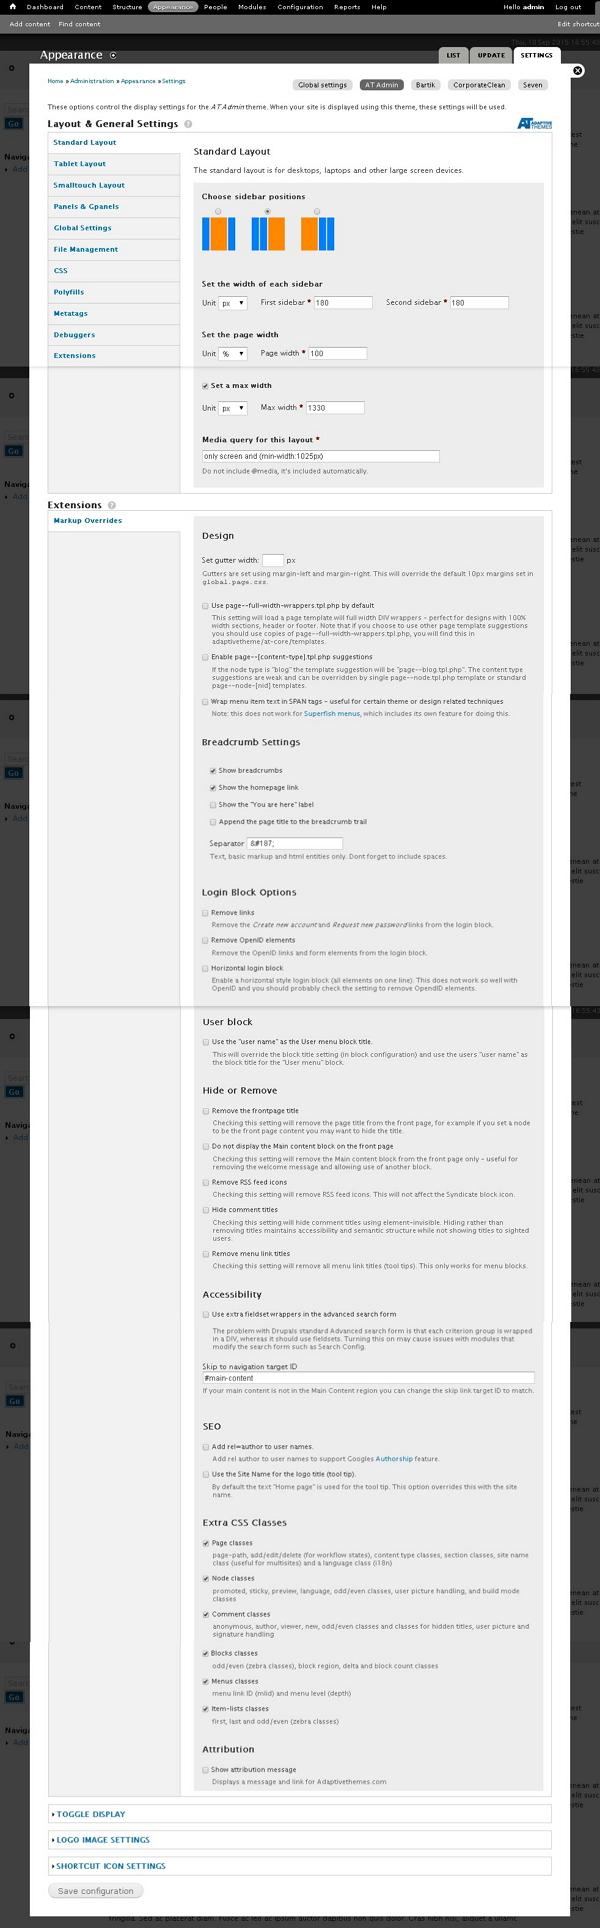 drupal-themes-and-layouts-step13.jpg 